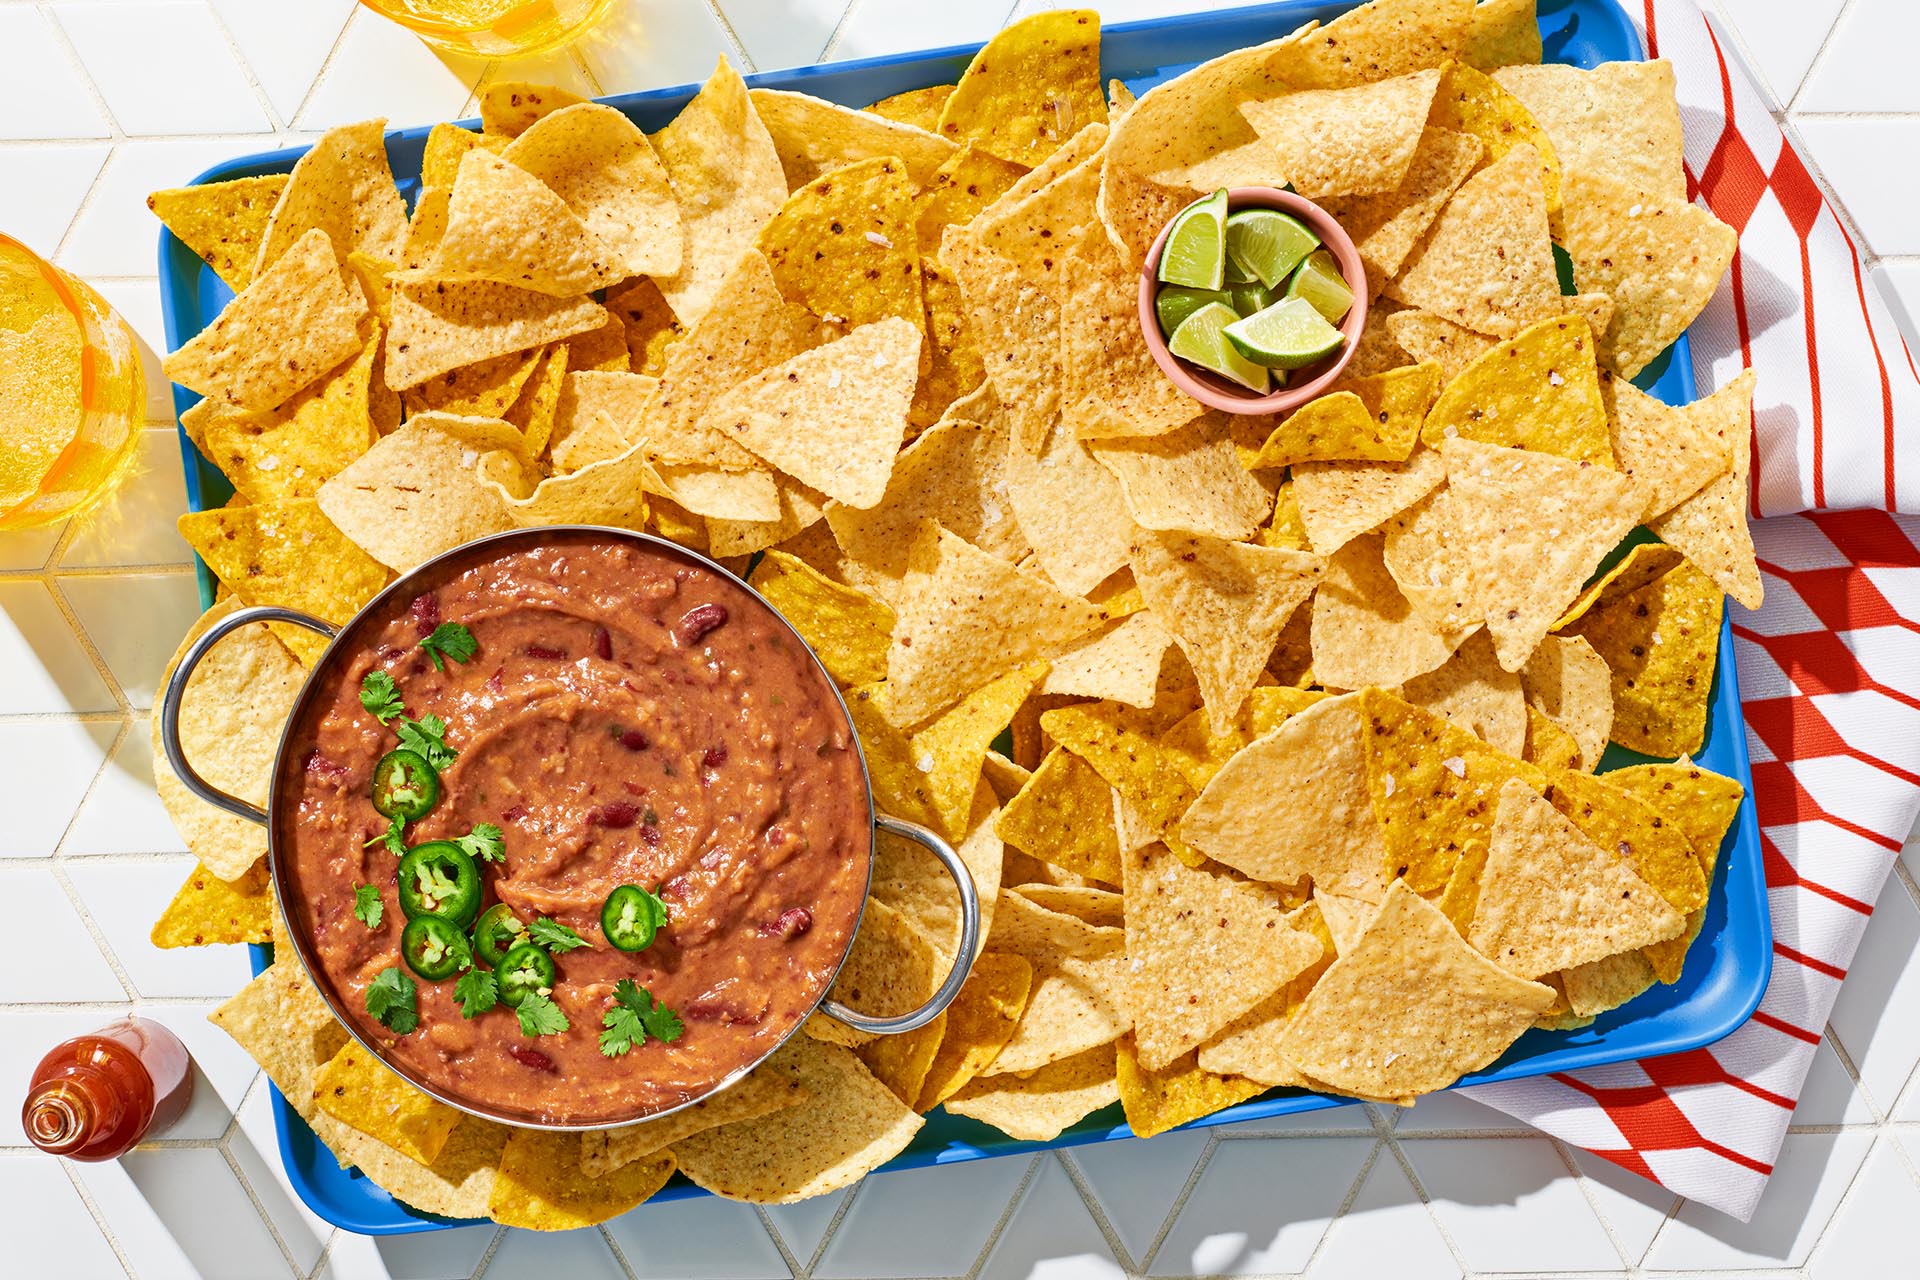 A bowl of half-smashed refried beans garnished with sliced jalapenos on a bed of tortilla chips